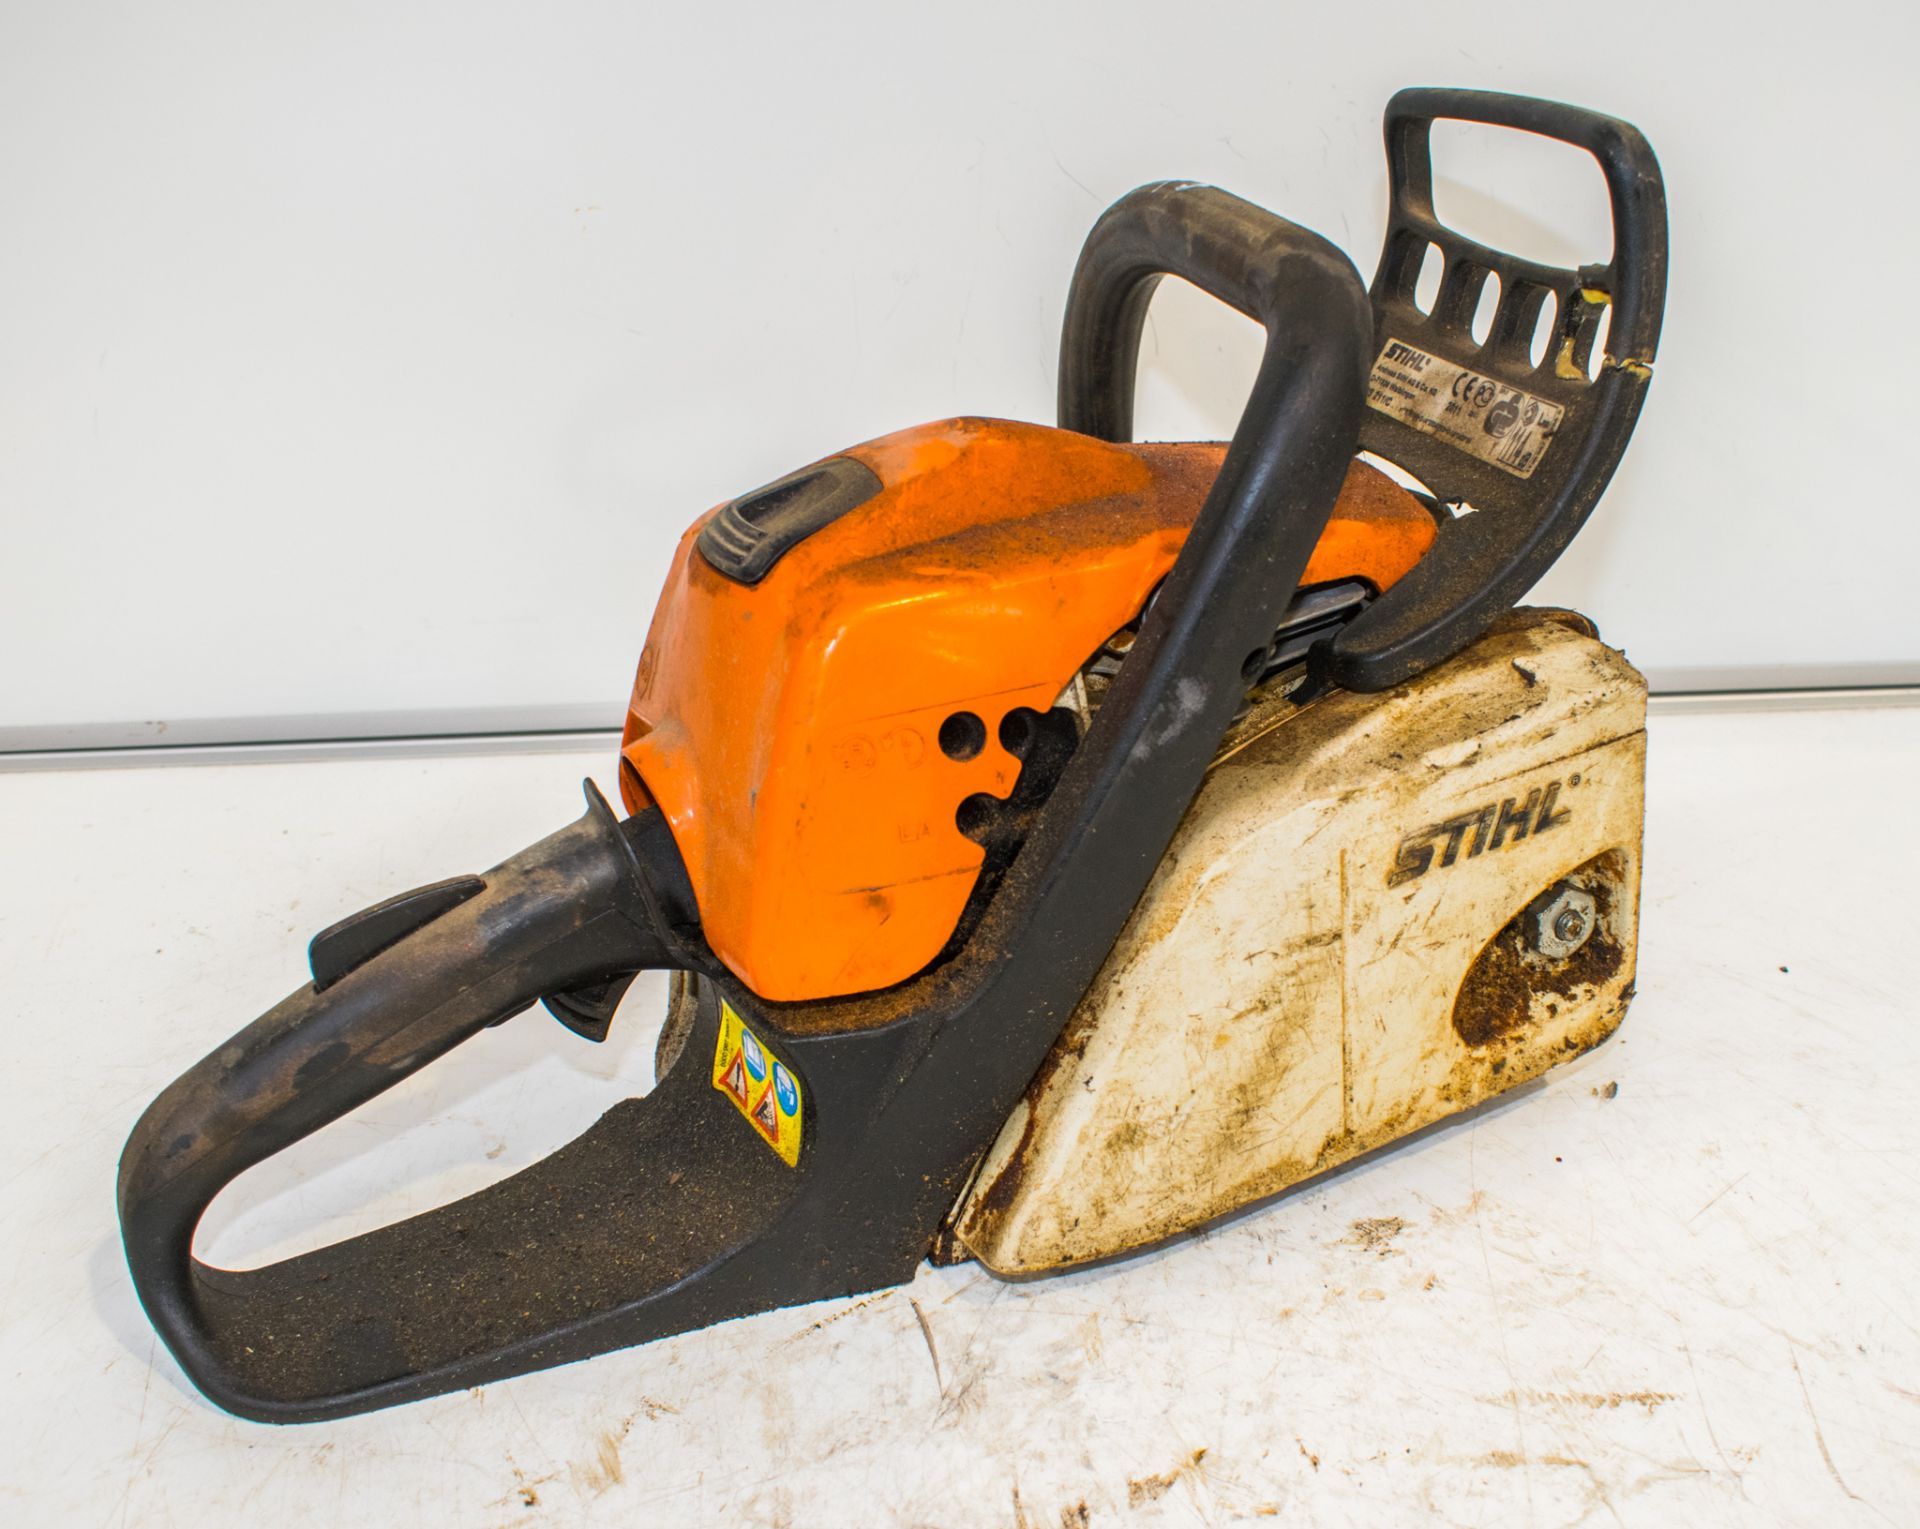 Stihl MS211 petrol driven chain saw * bar missing * - Image 2 of 2